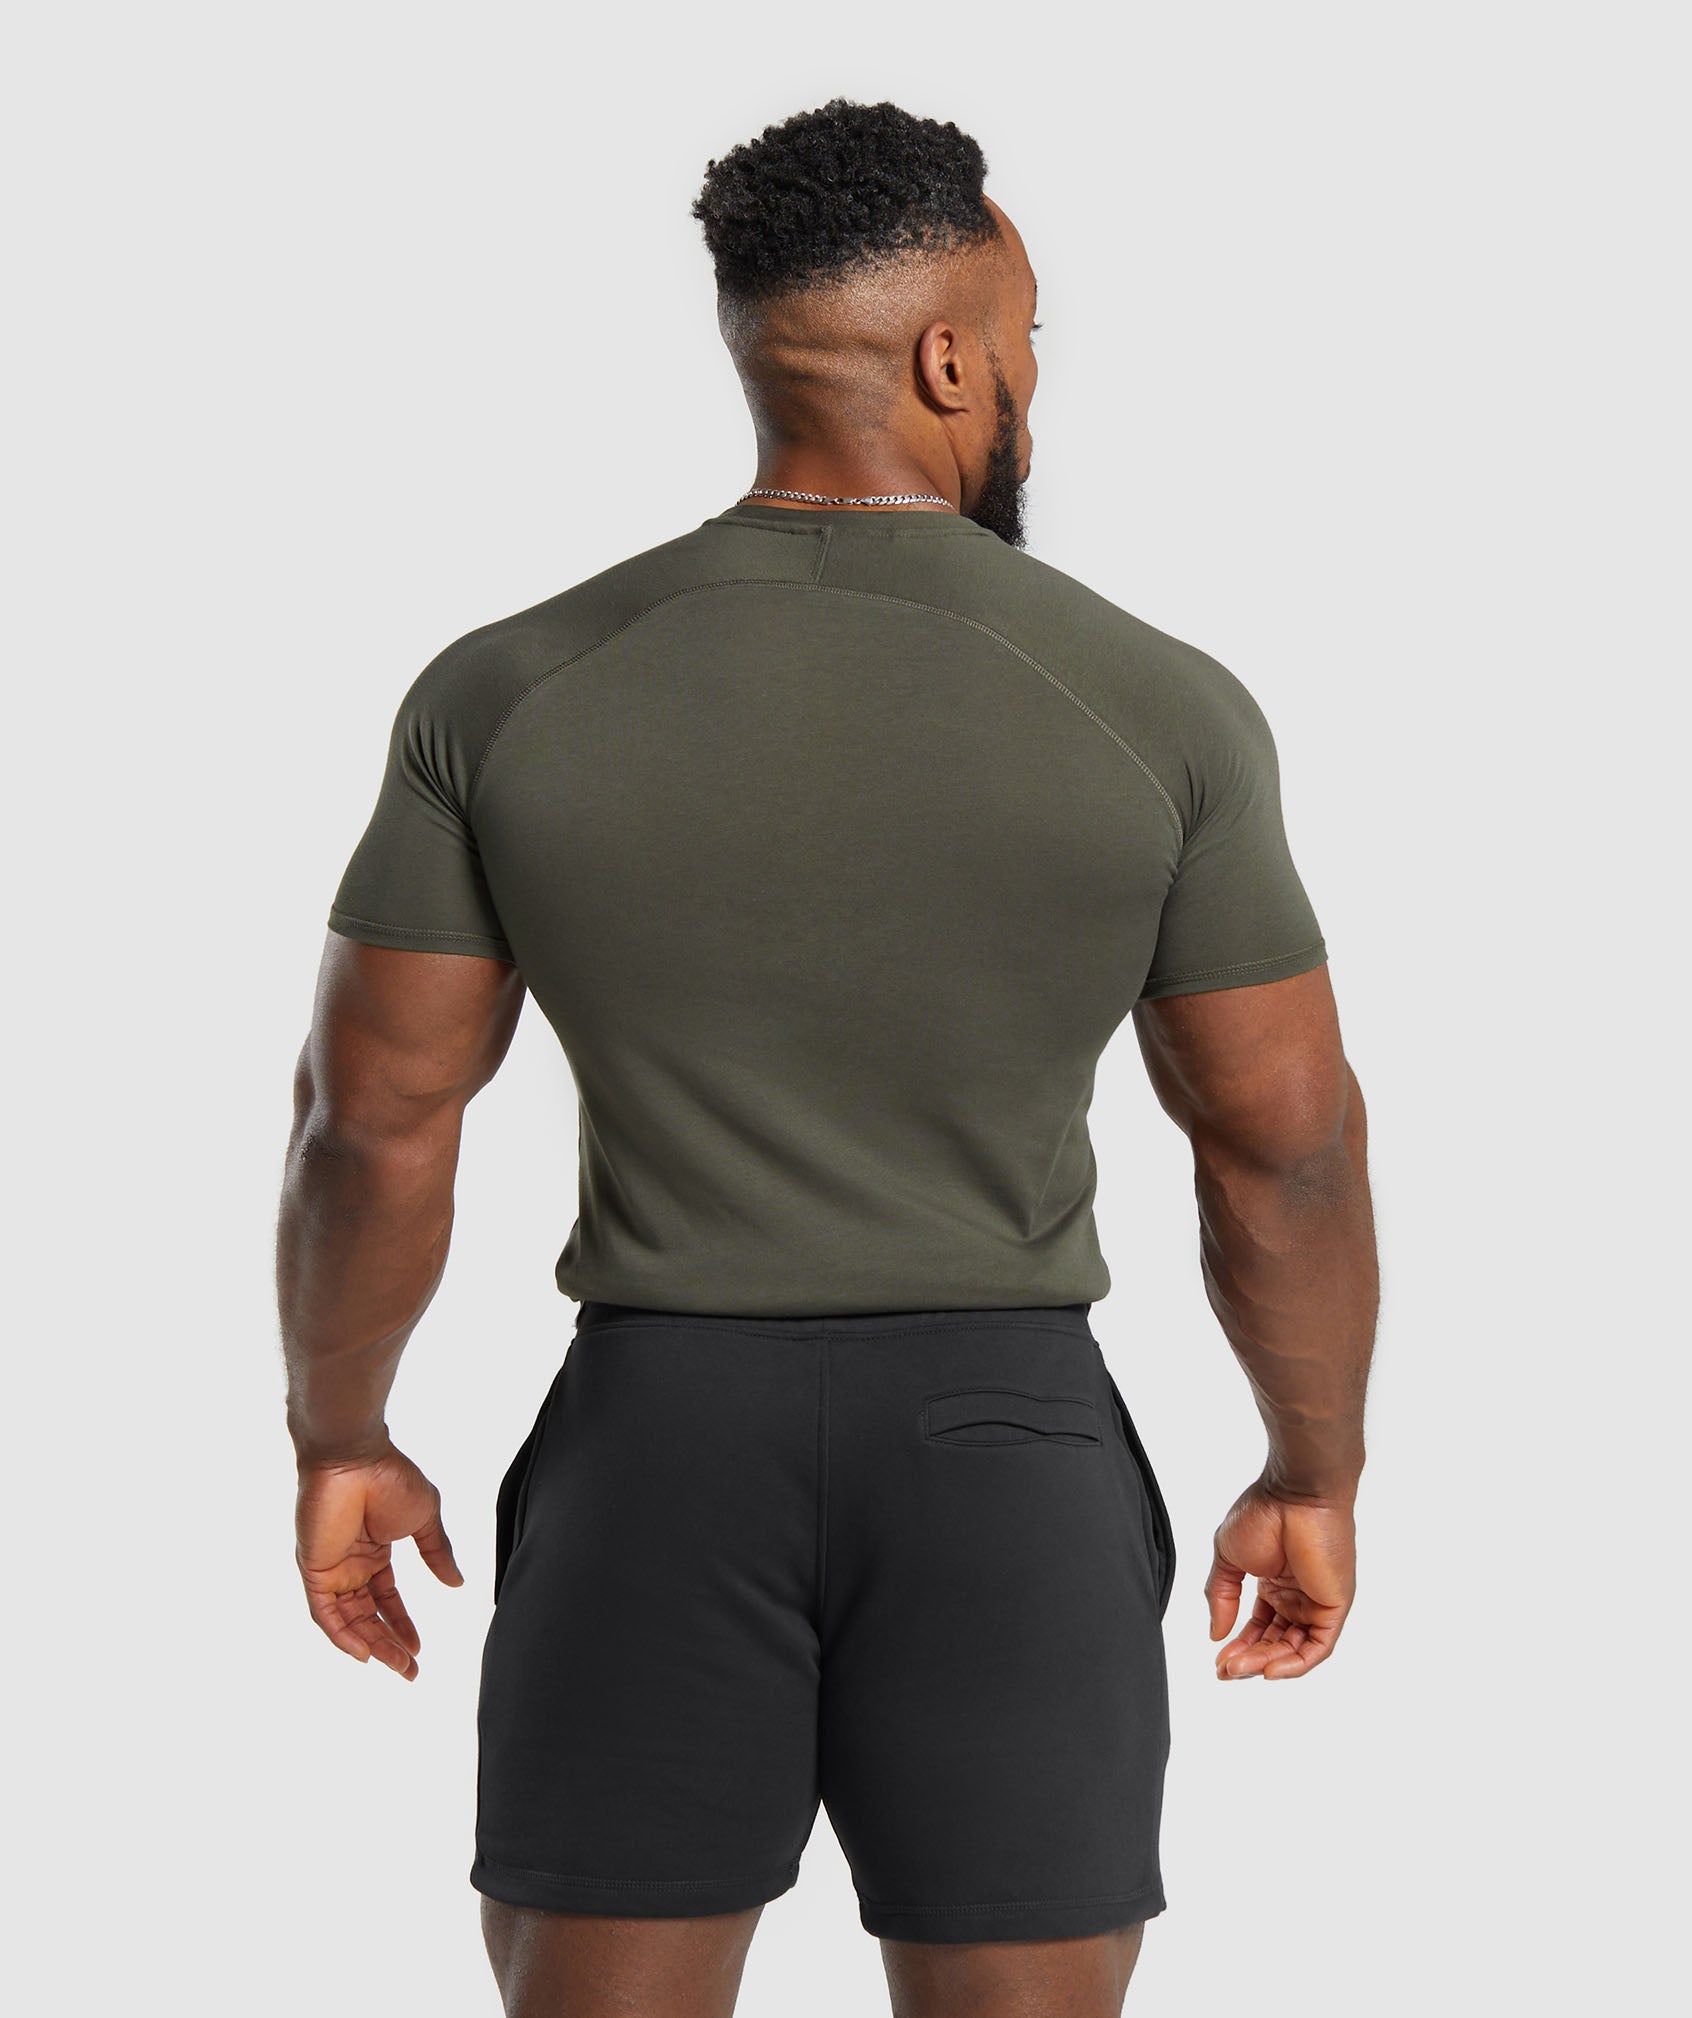 Impact Muscle T-Shirt in Strength Green - view 2